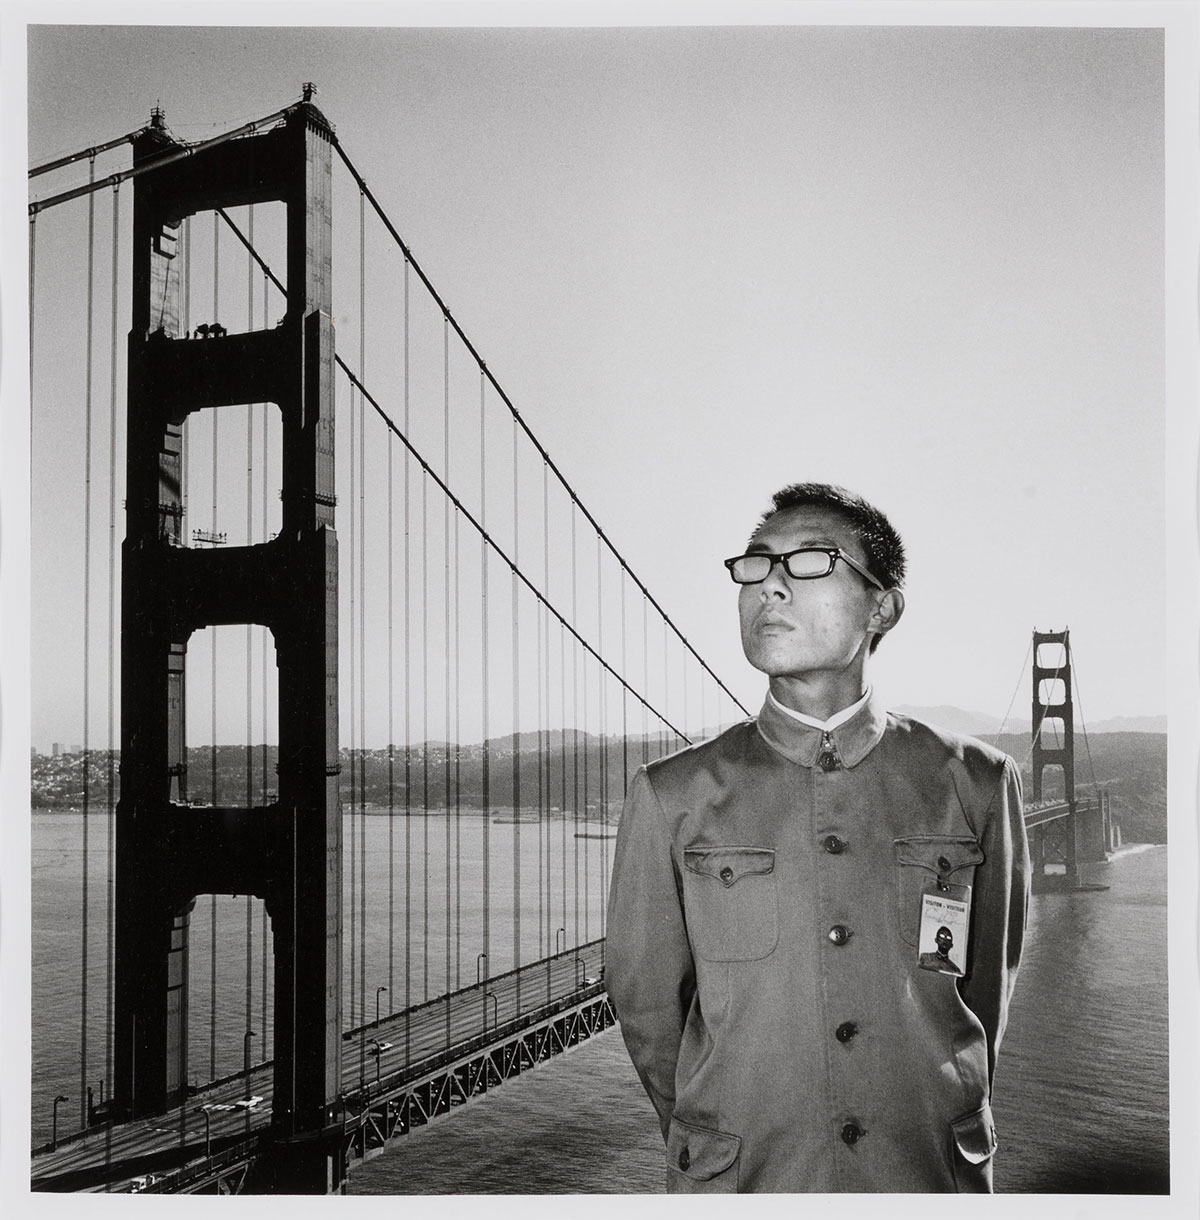 A man in a uniform-like jacket stands with his arms crossed behind him in front of the Golden Gate Bridge, looking out beyond the viewer,